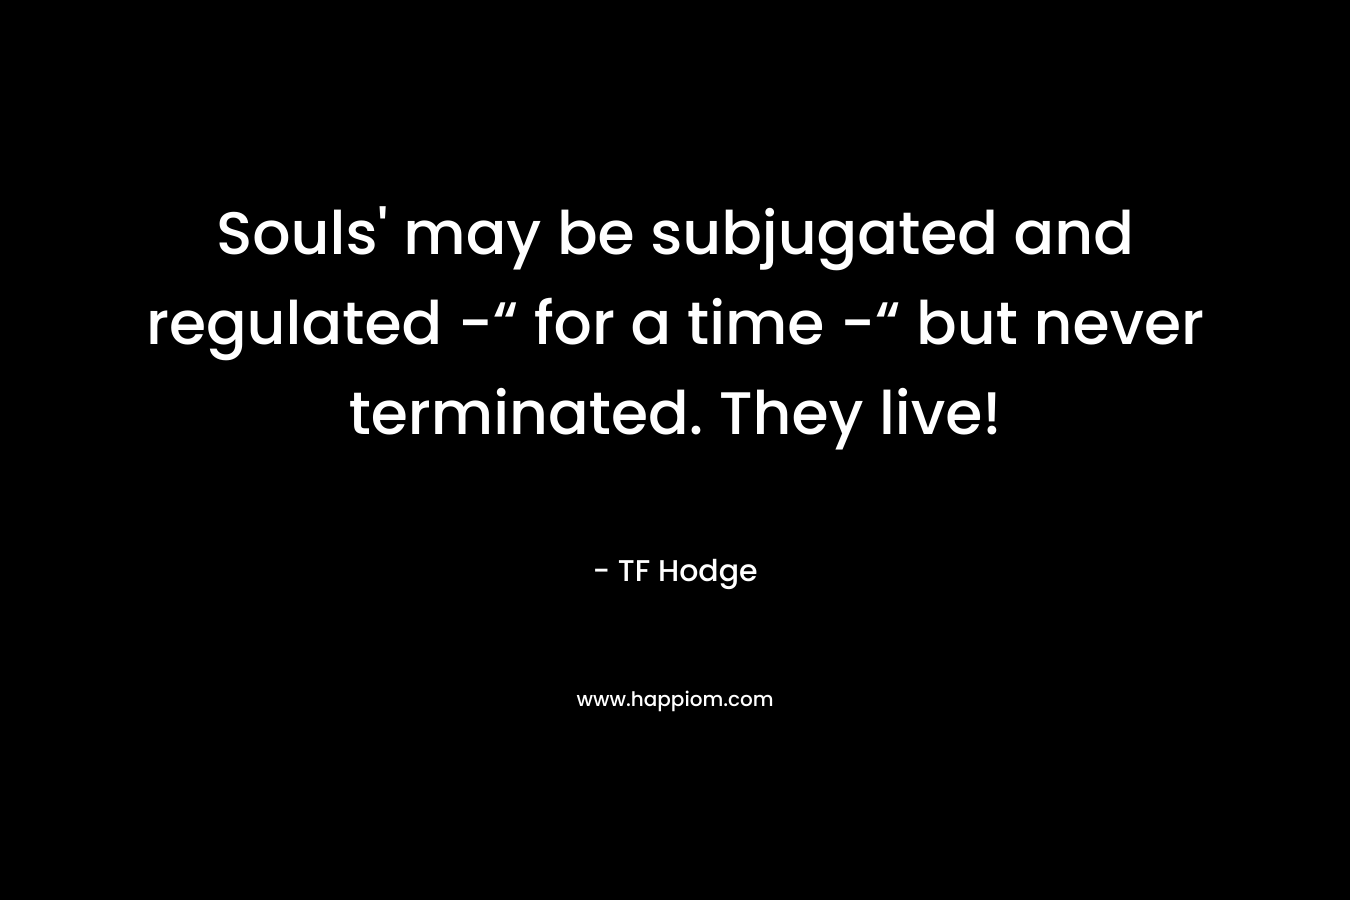 Souls’ may be subjugated and regulated -“ for a time -“ but never terminated. They live! – TF Hodge